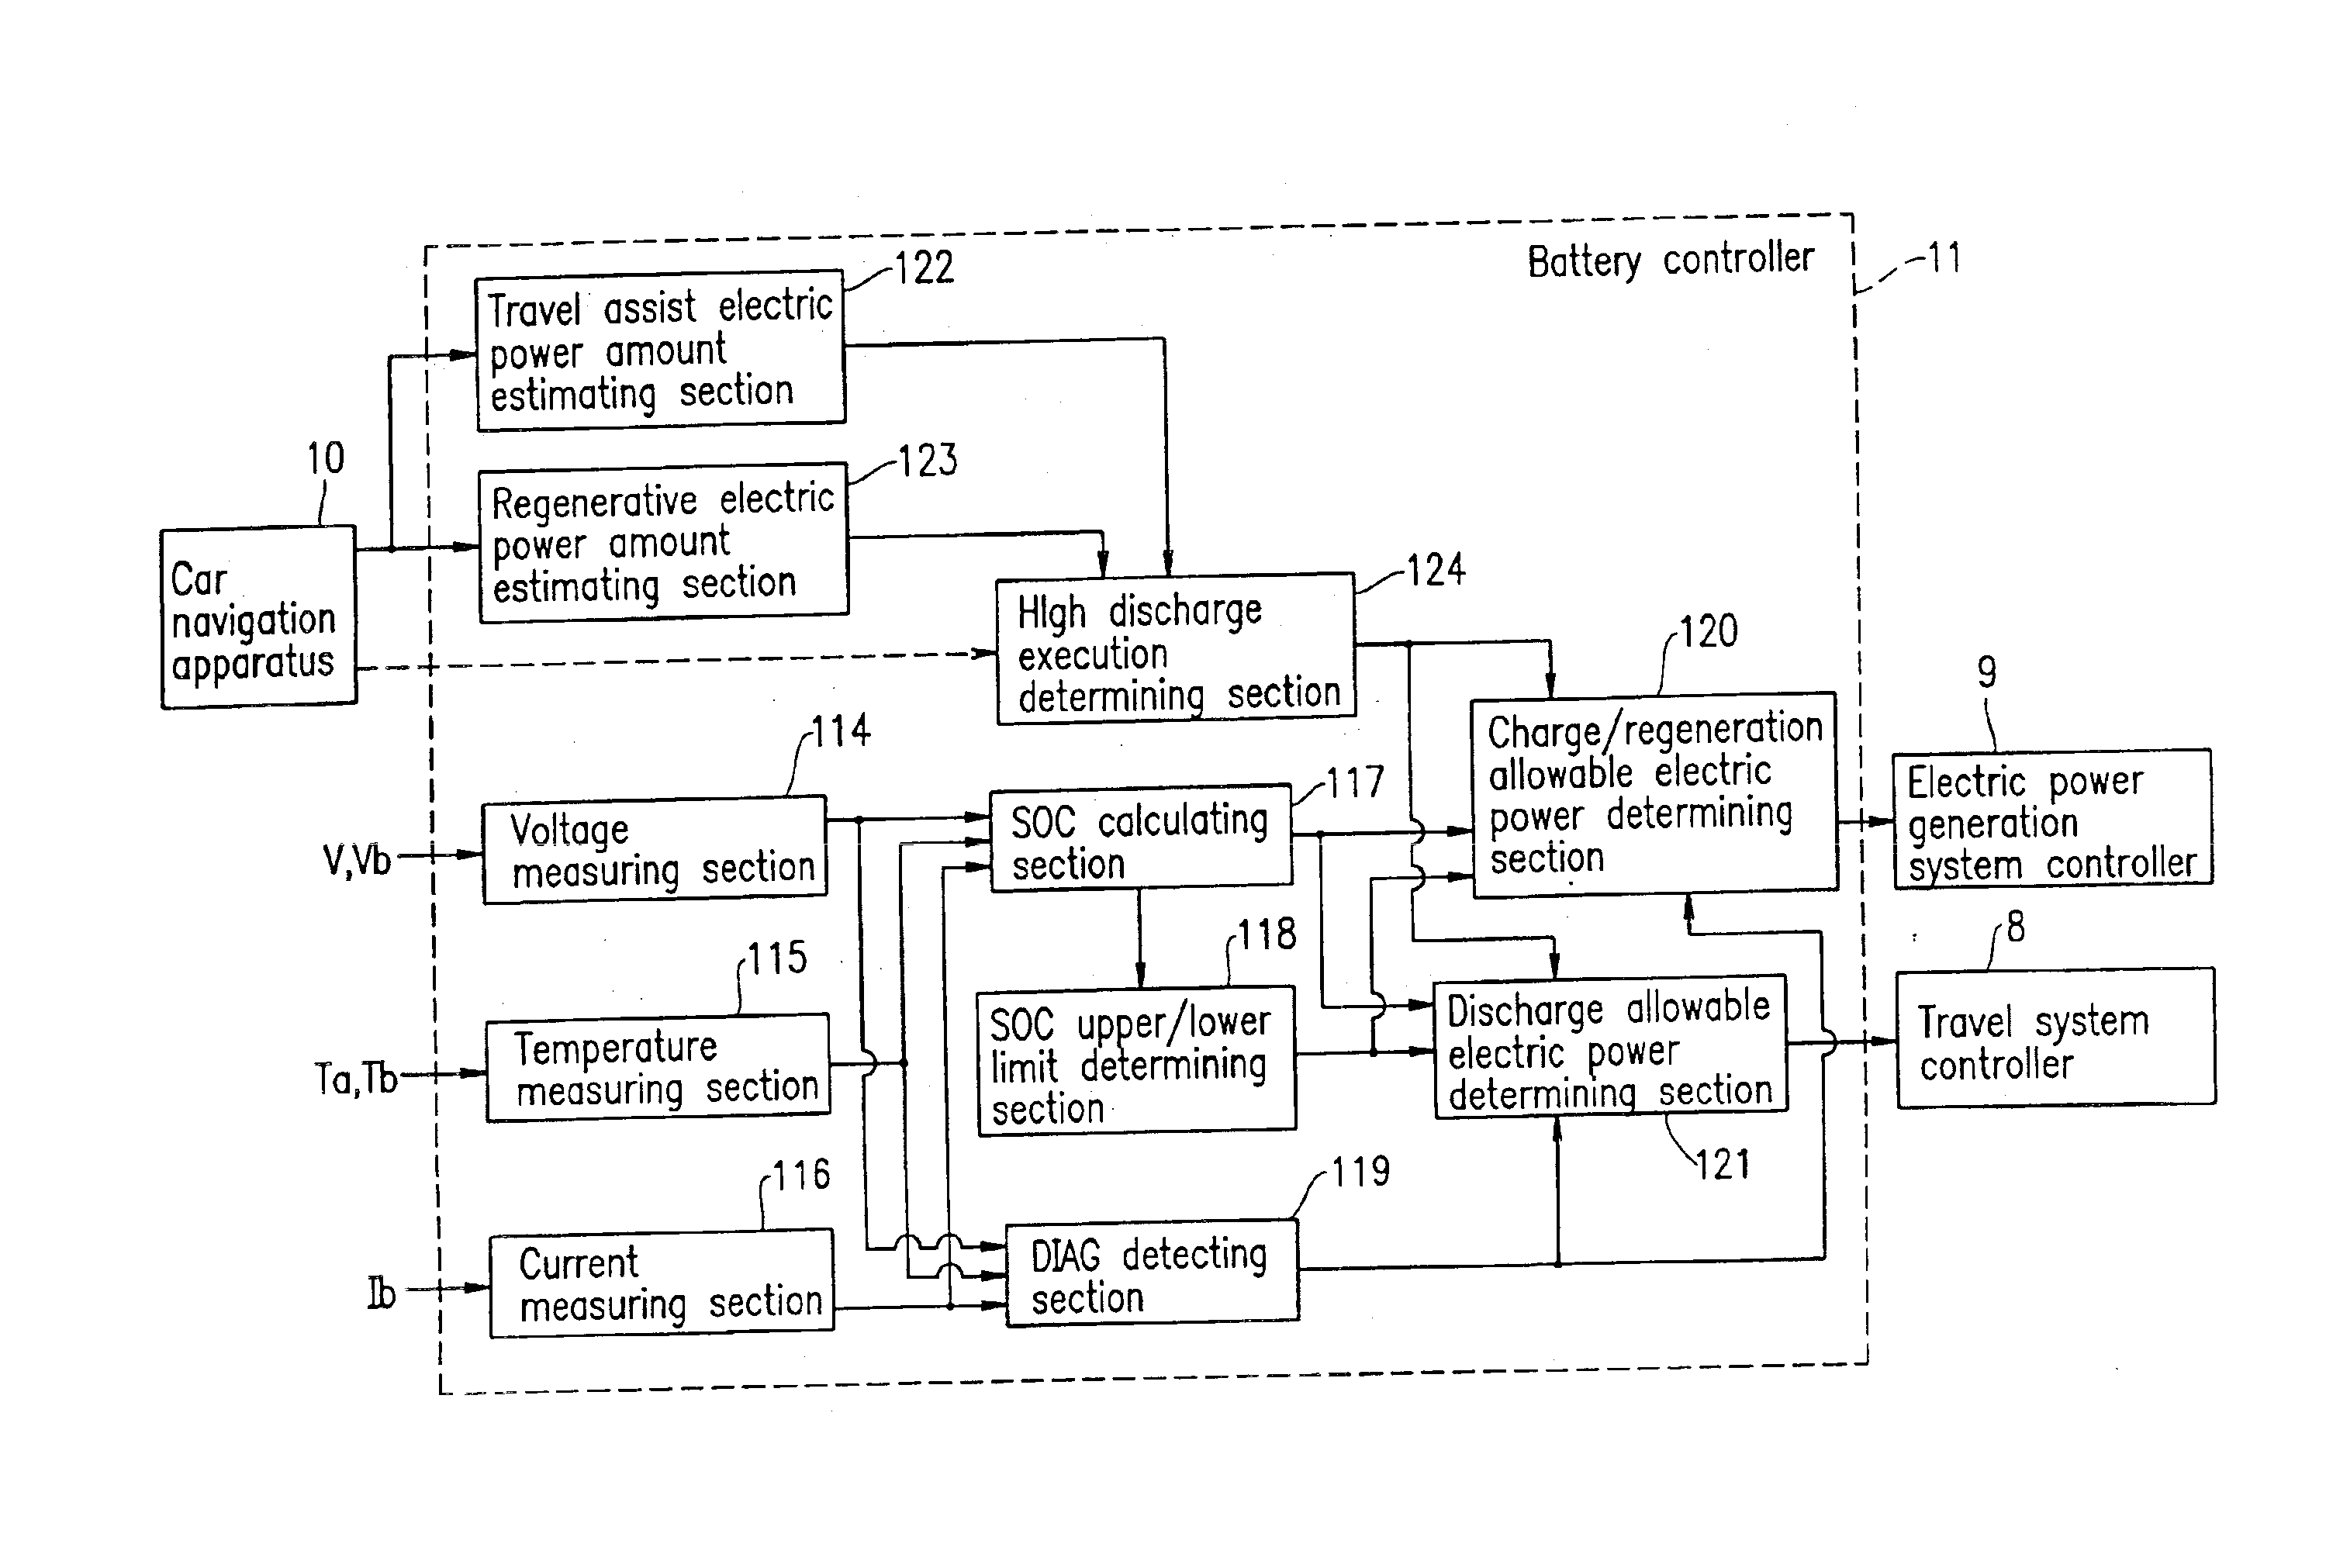 Apparatus for controlling hybrid electric vehicle